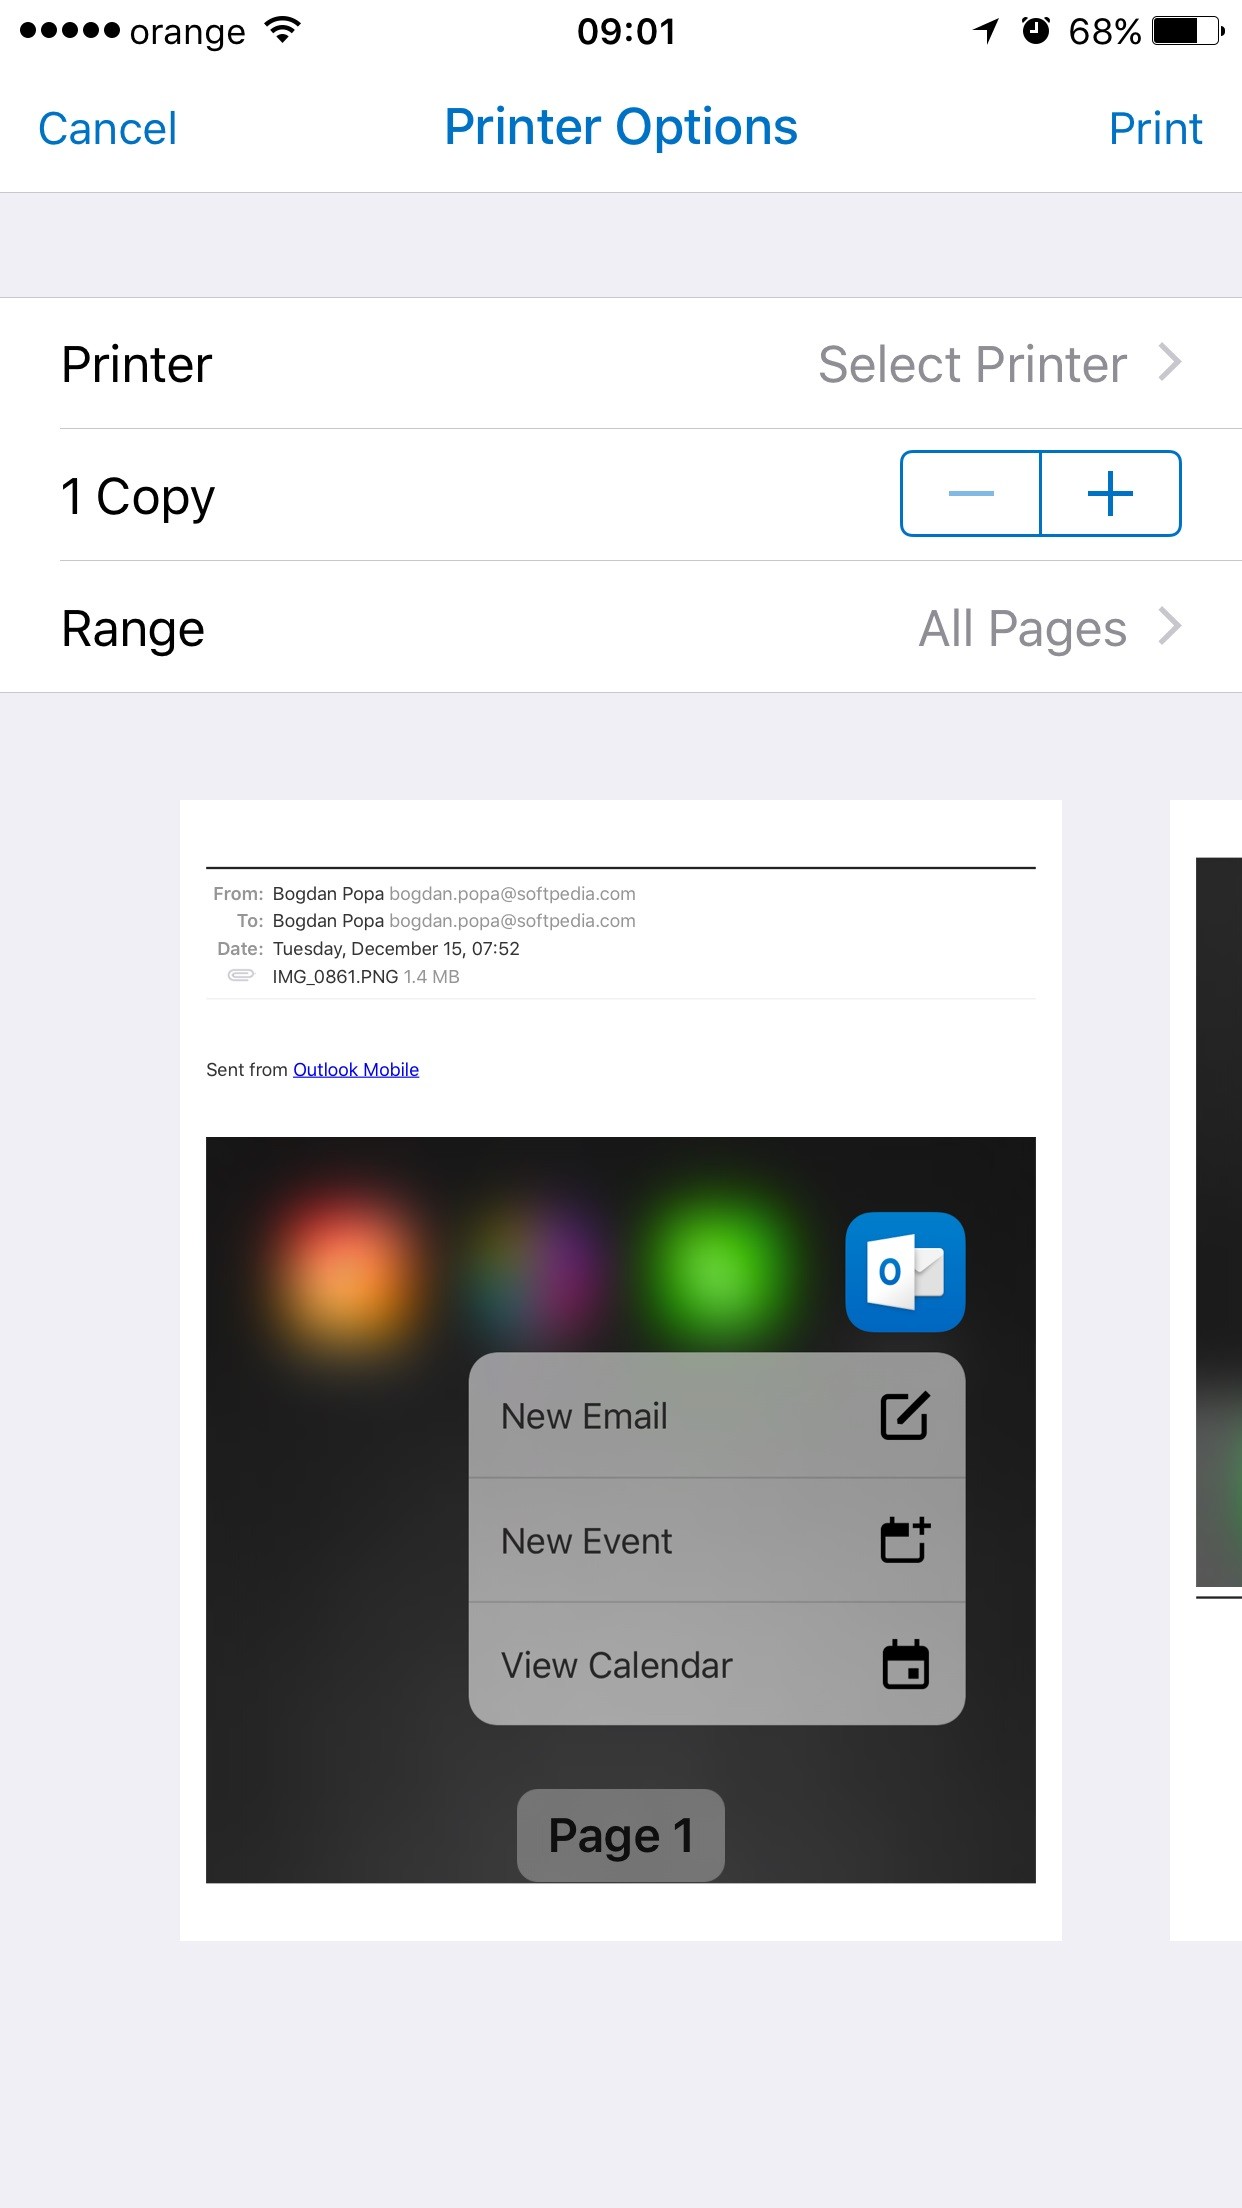 Microsoft Updates Outlook for iOS with 3D Touch Support